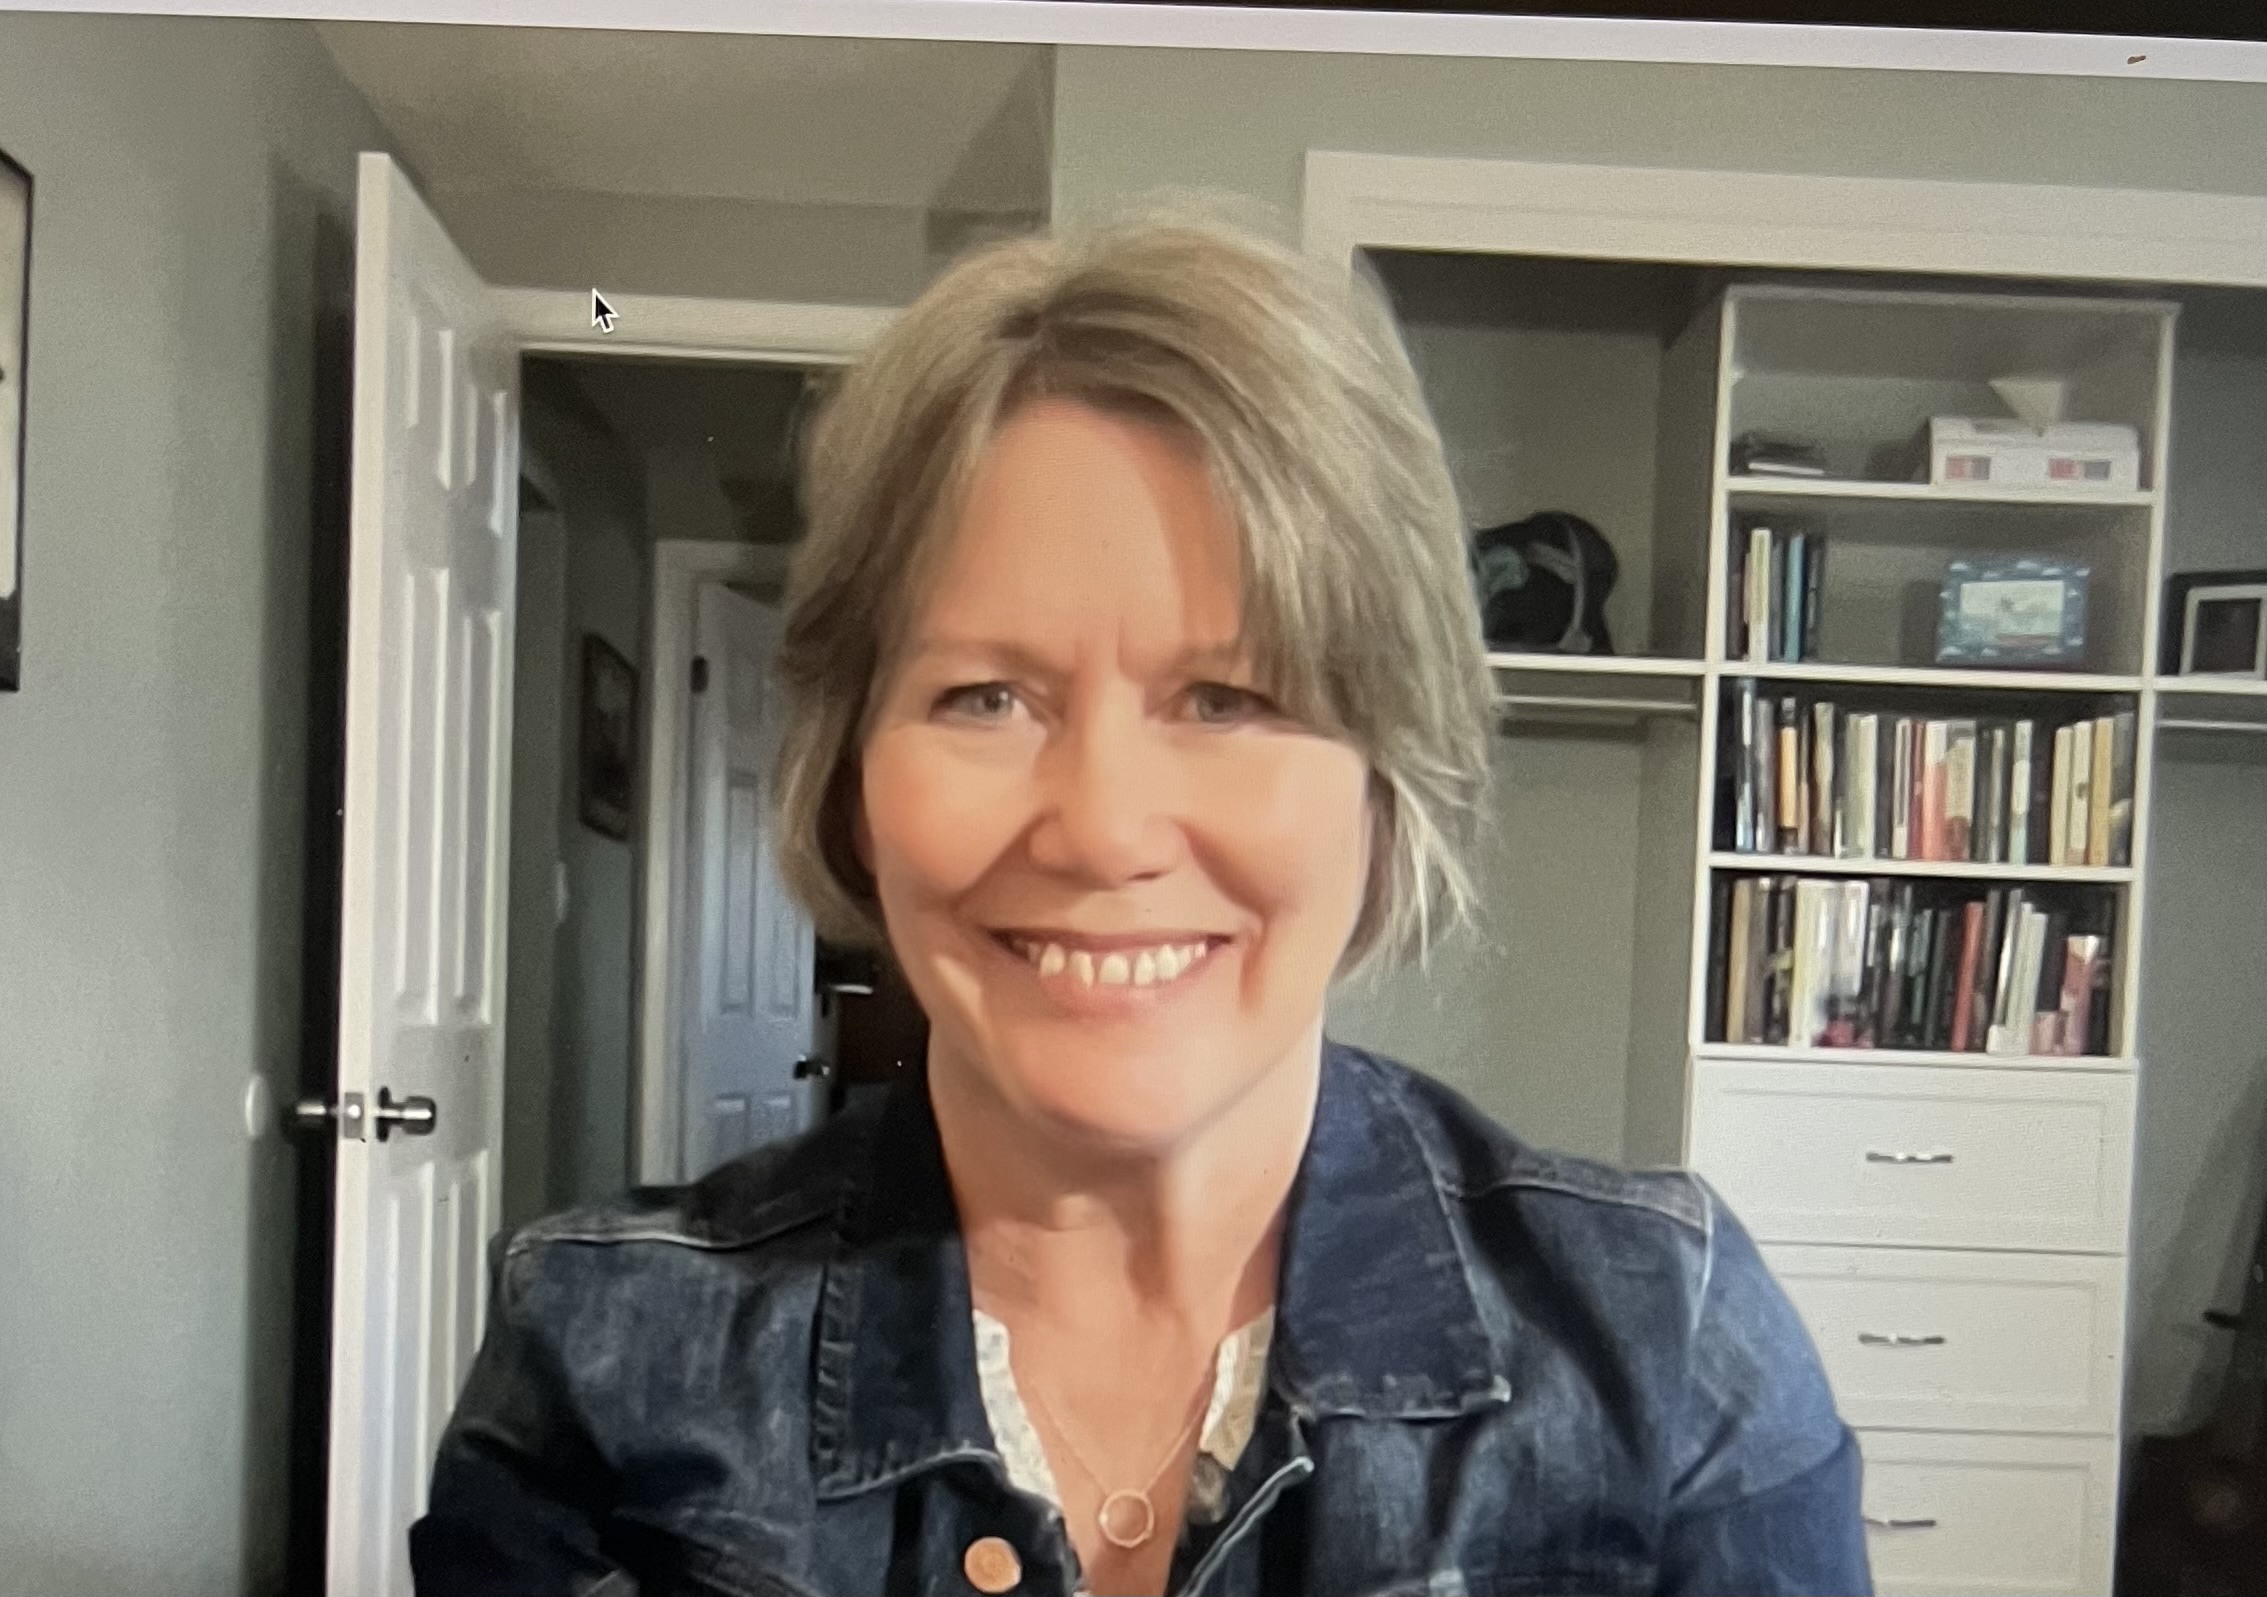 A photo of Rebecca Roberts, a white woman with ash blonde hair smiling for a photo. A bookcase is behind her and she is wearing a jean jacket.